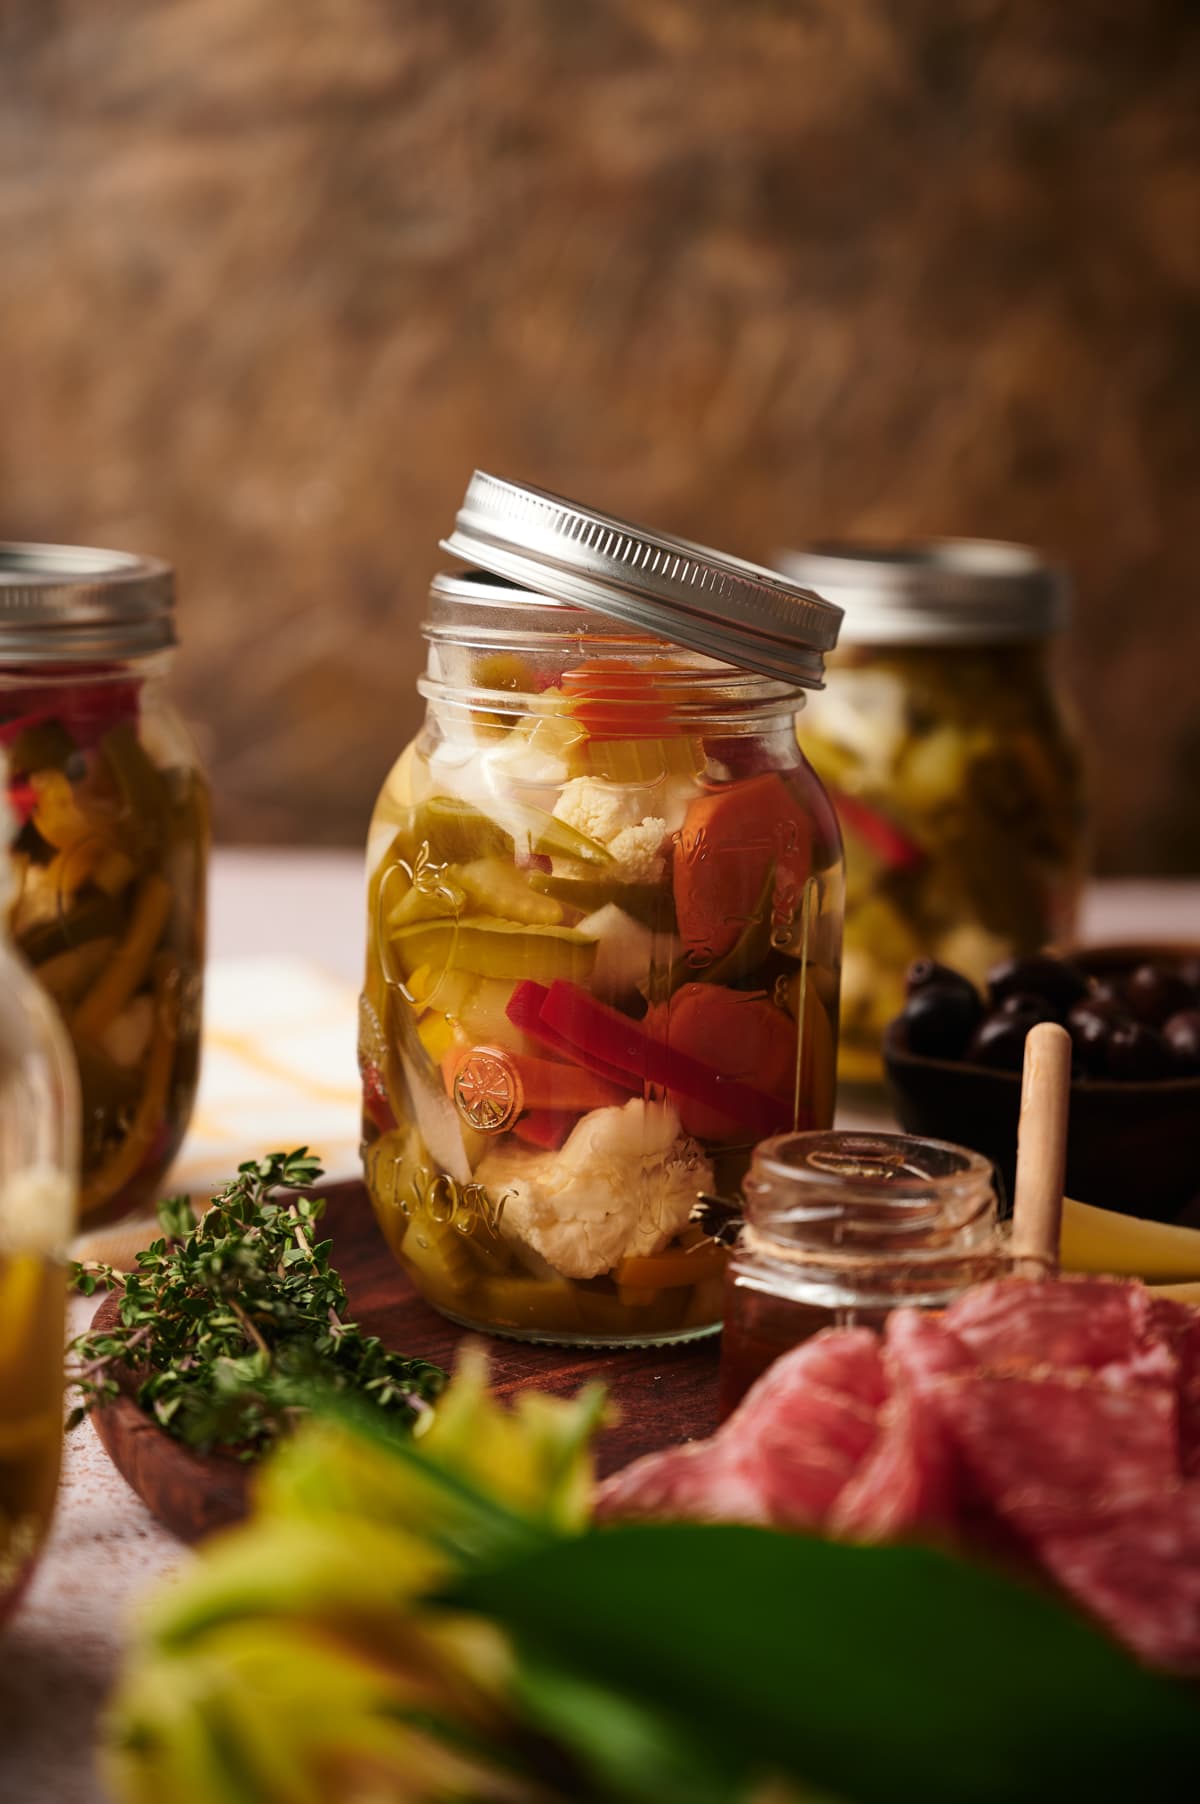 picture of homemade giardiniera in its vase on table with other appetizers